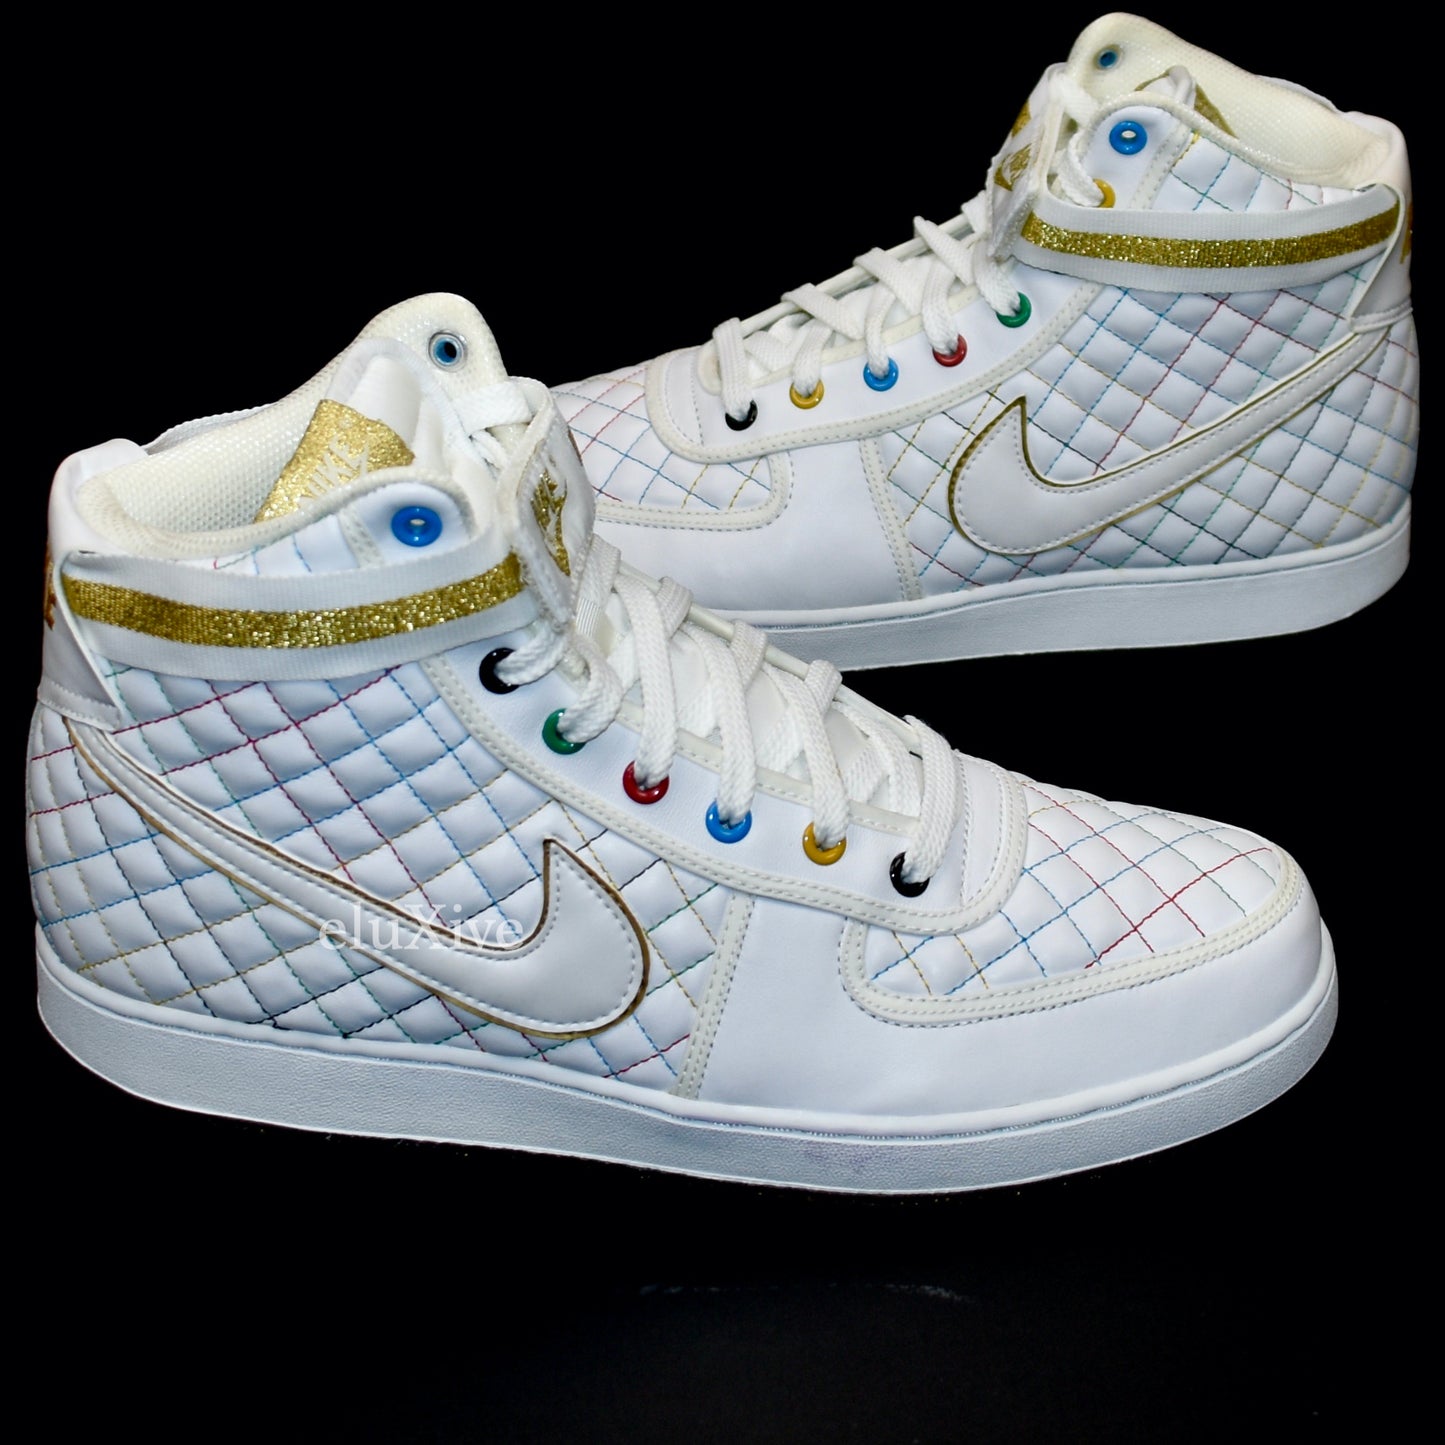 Nike - Vandal High Premium Quilted Leather 'eBay'